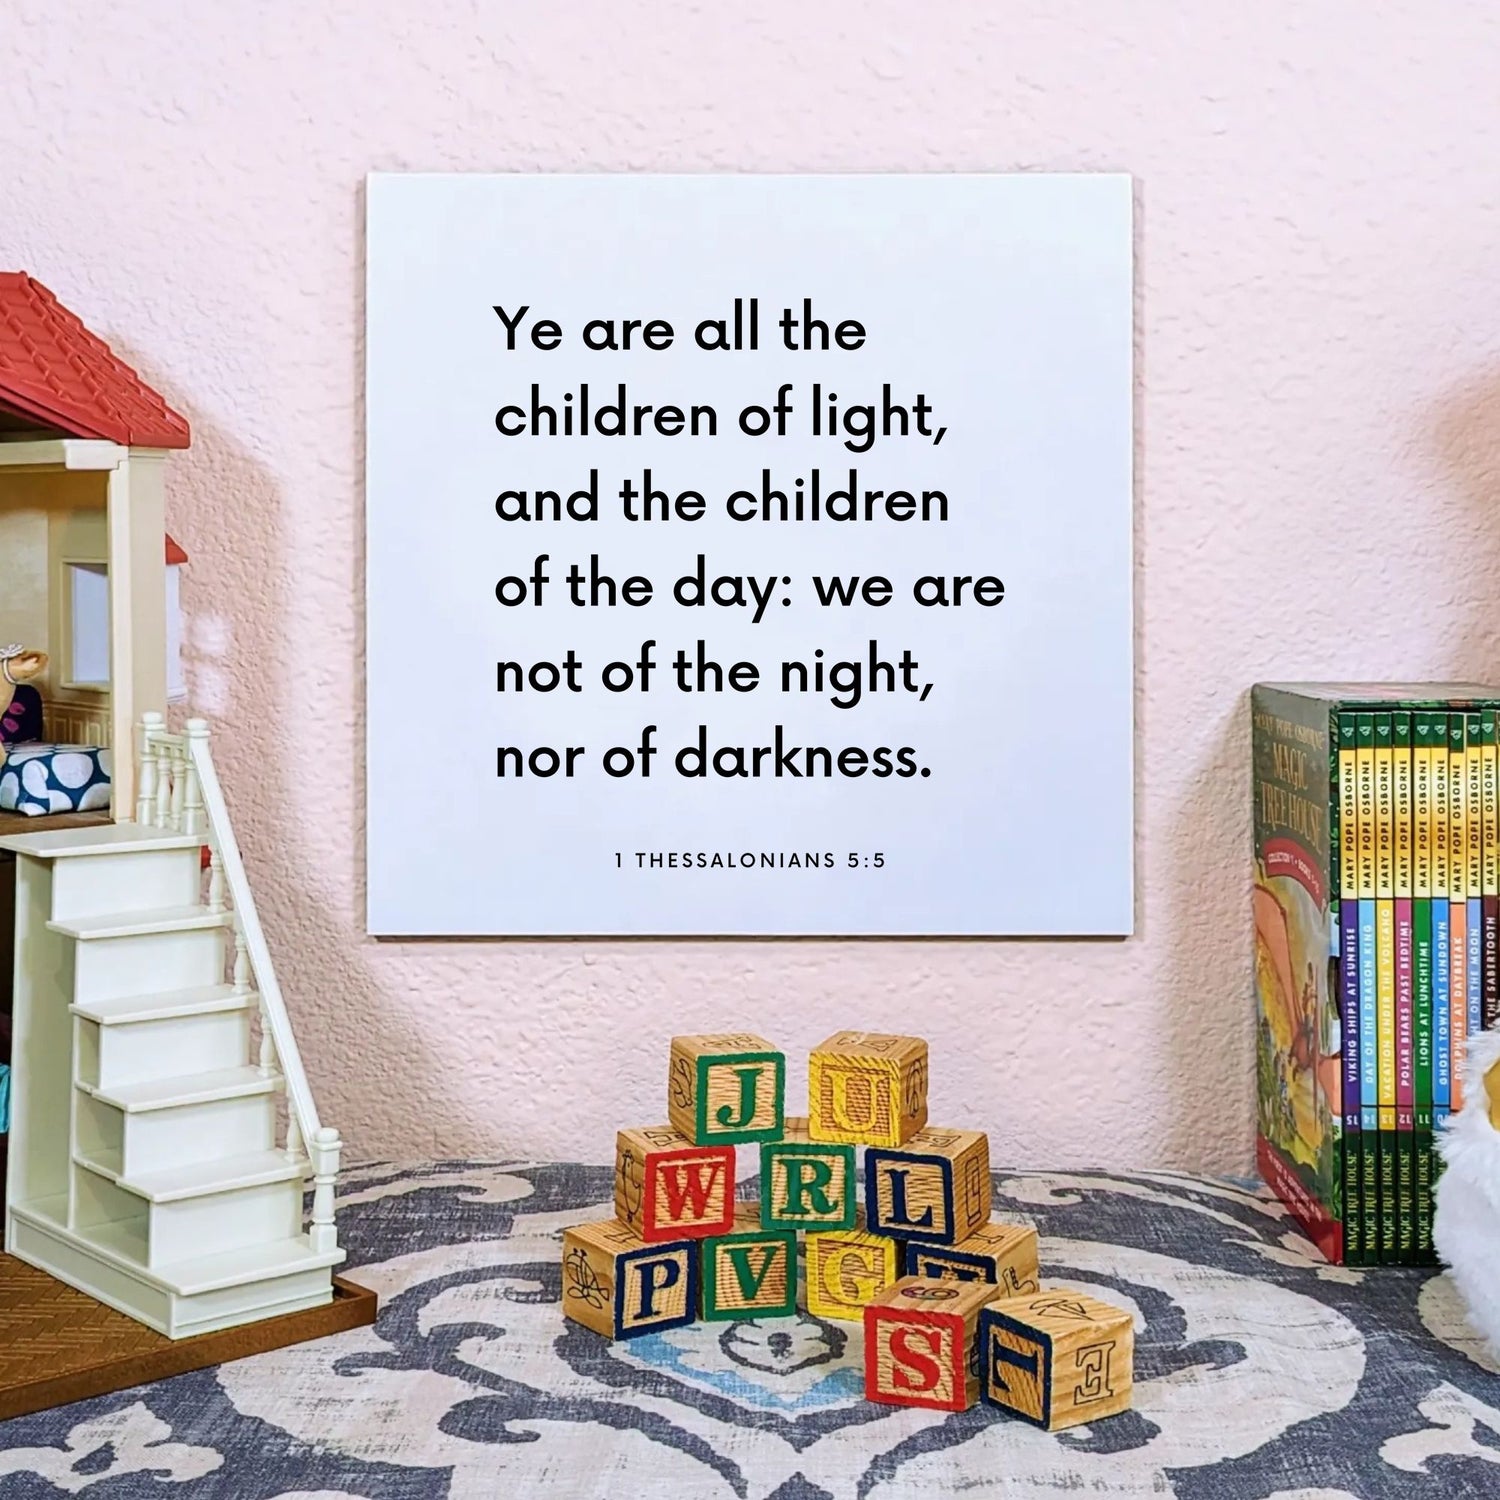 Playroom mouting of the scripture tile for 1 Thessalonians 5:5 - "Ye are all the children of light, and the children of the day"